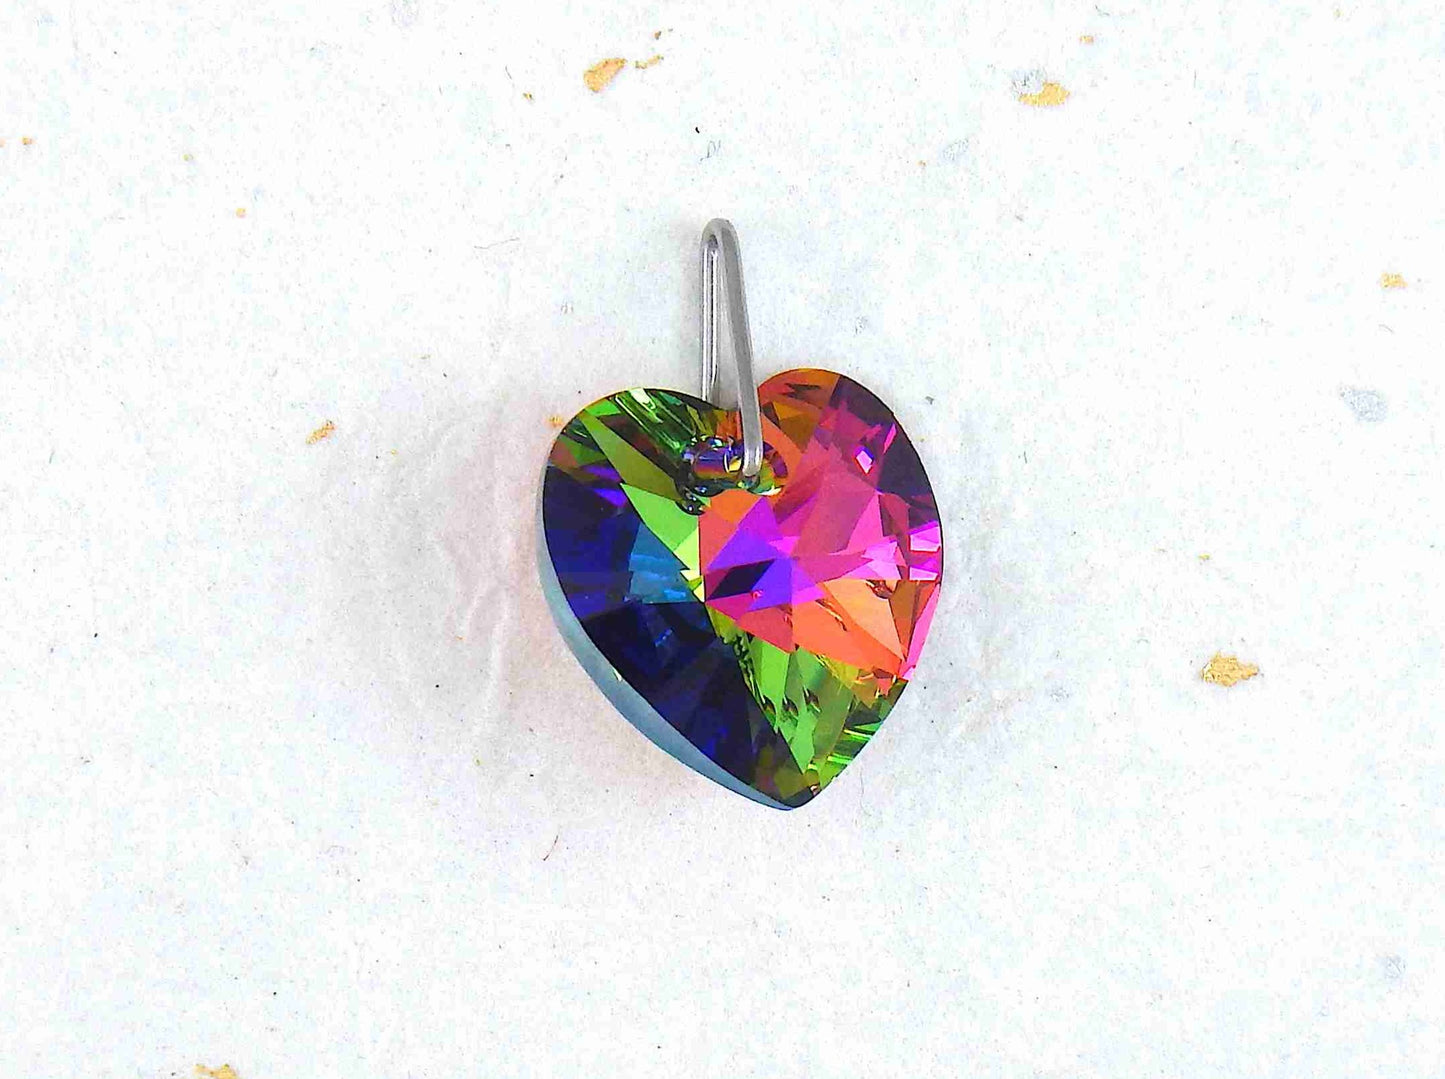 14/16-inch necklace with 14mm Vitrail Medium (fuchsia, orange, green) faceted Swarovski crystal heart pendant, stainless steel chain